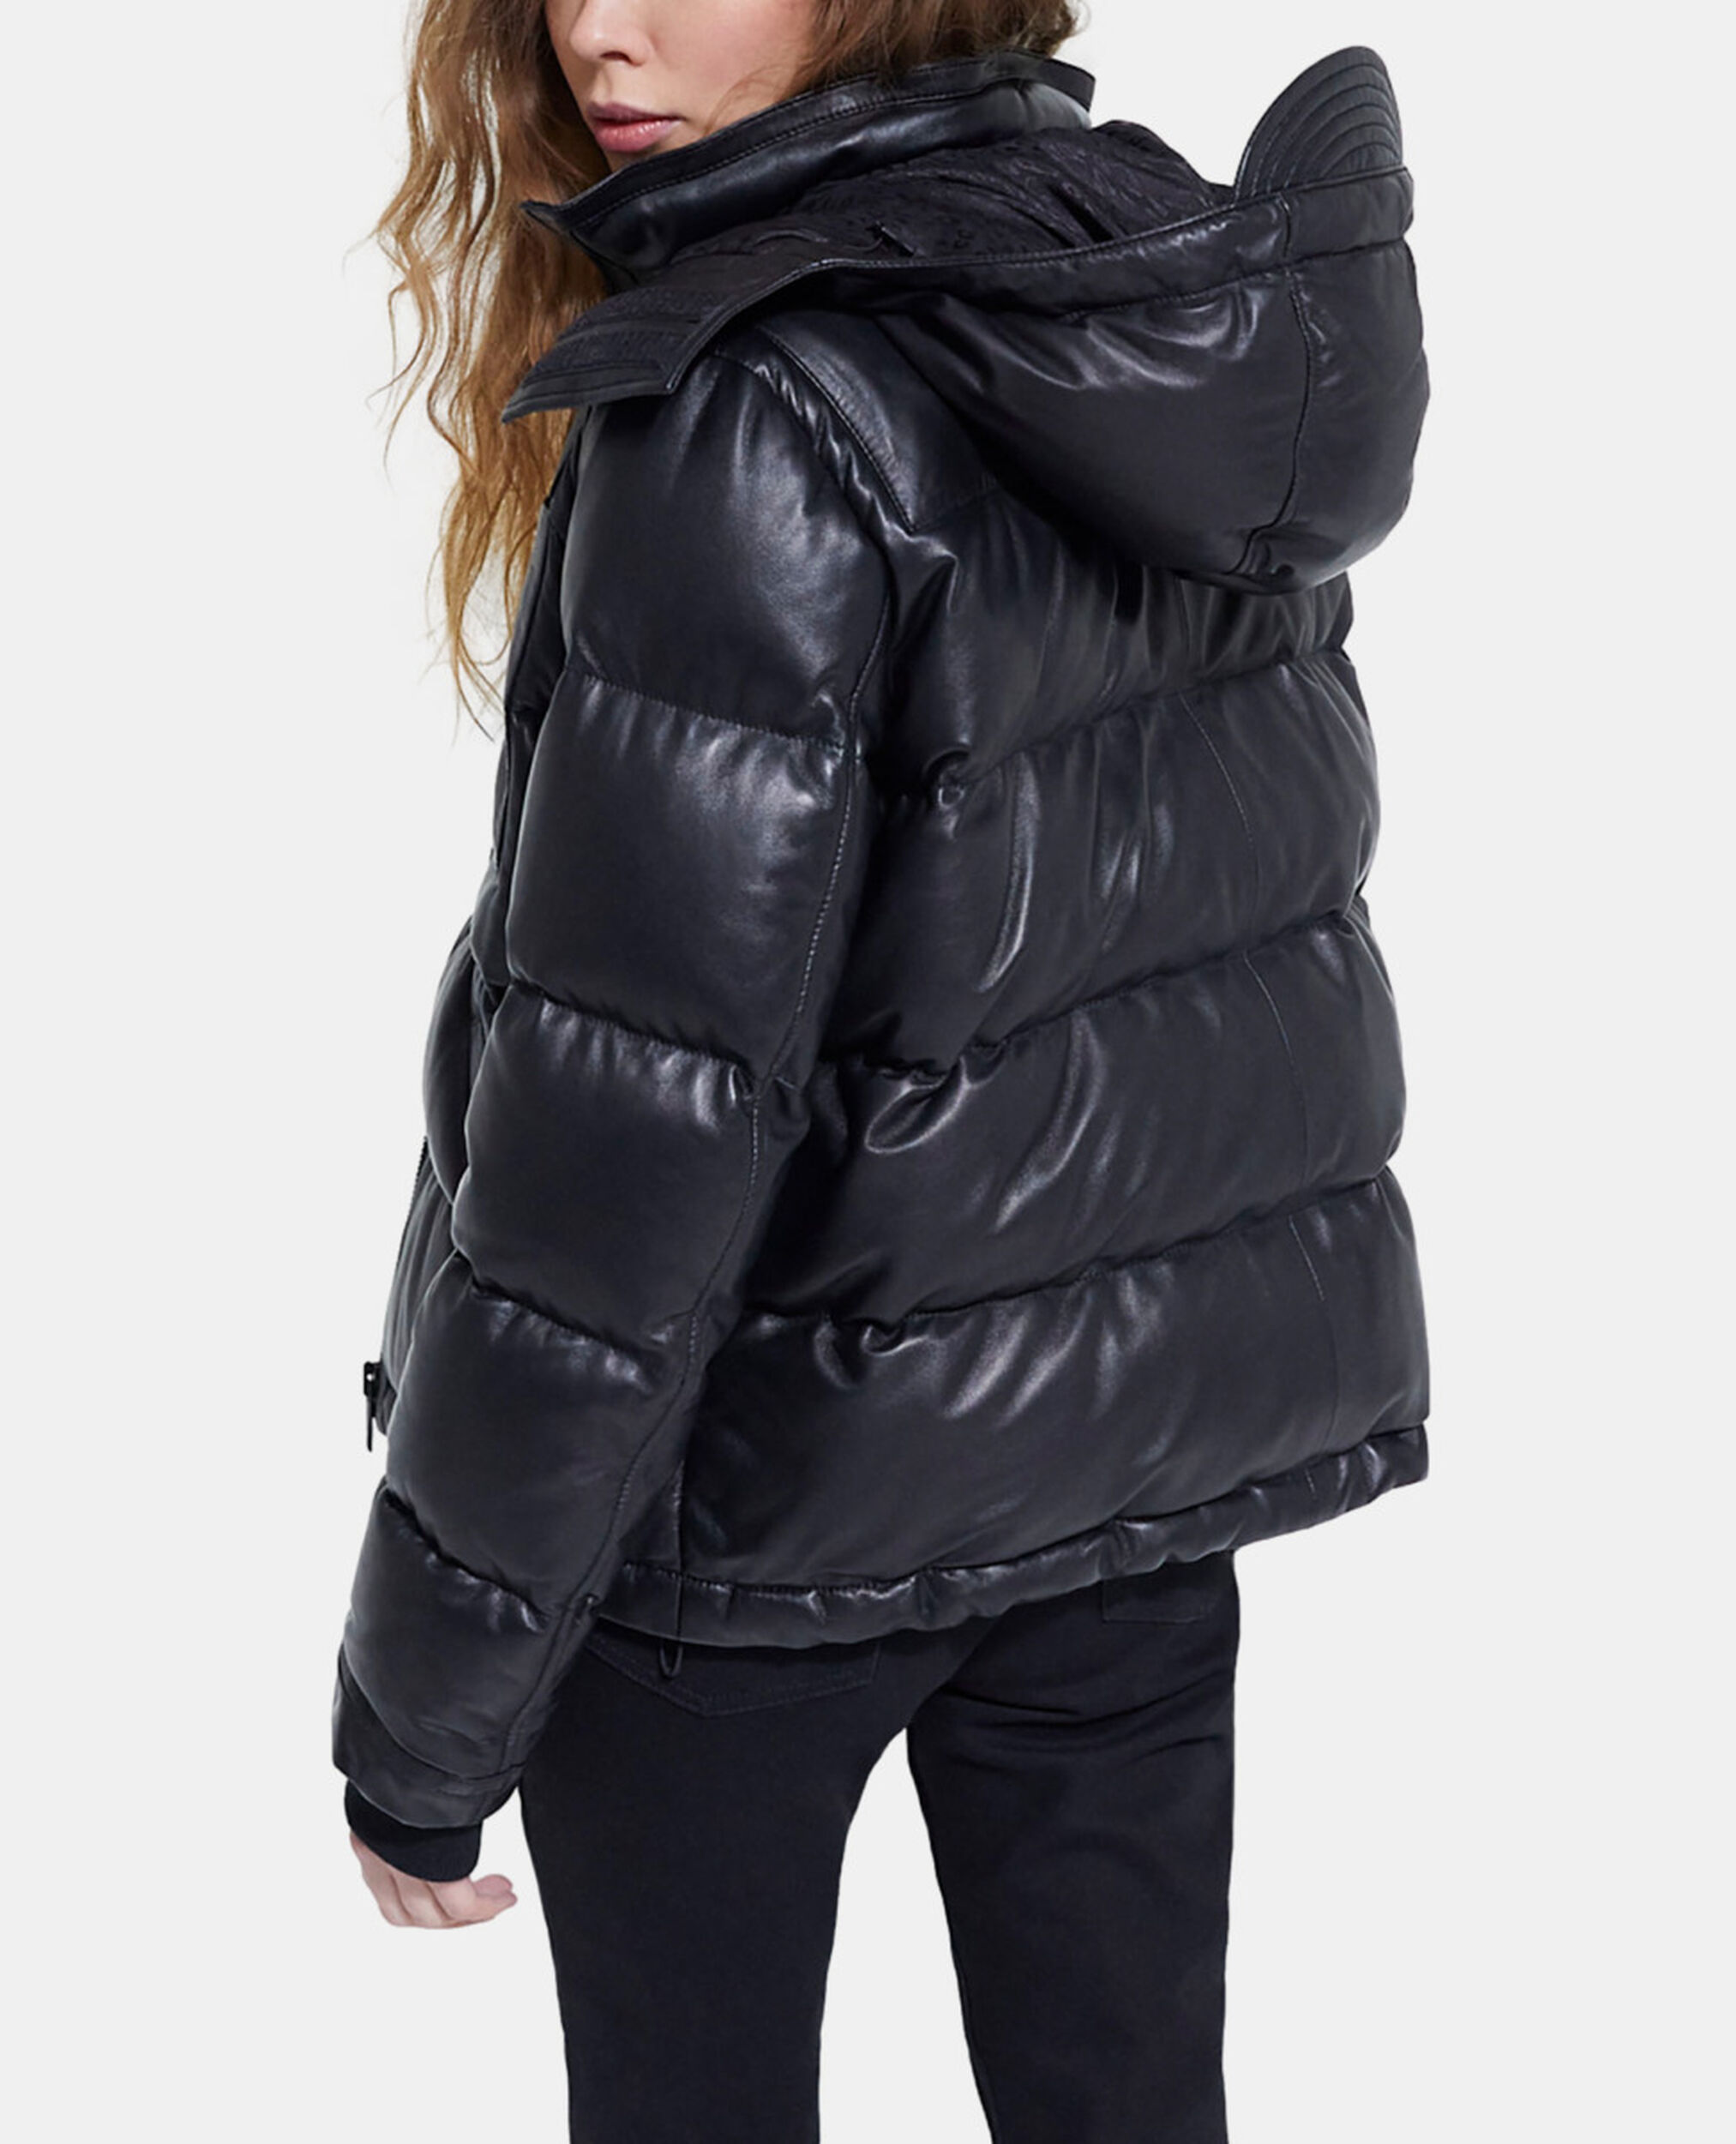 Black leather down jacket with straps and logo, BLACK, hi-res image number null